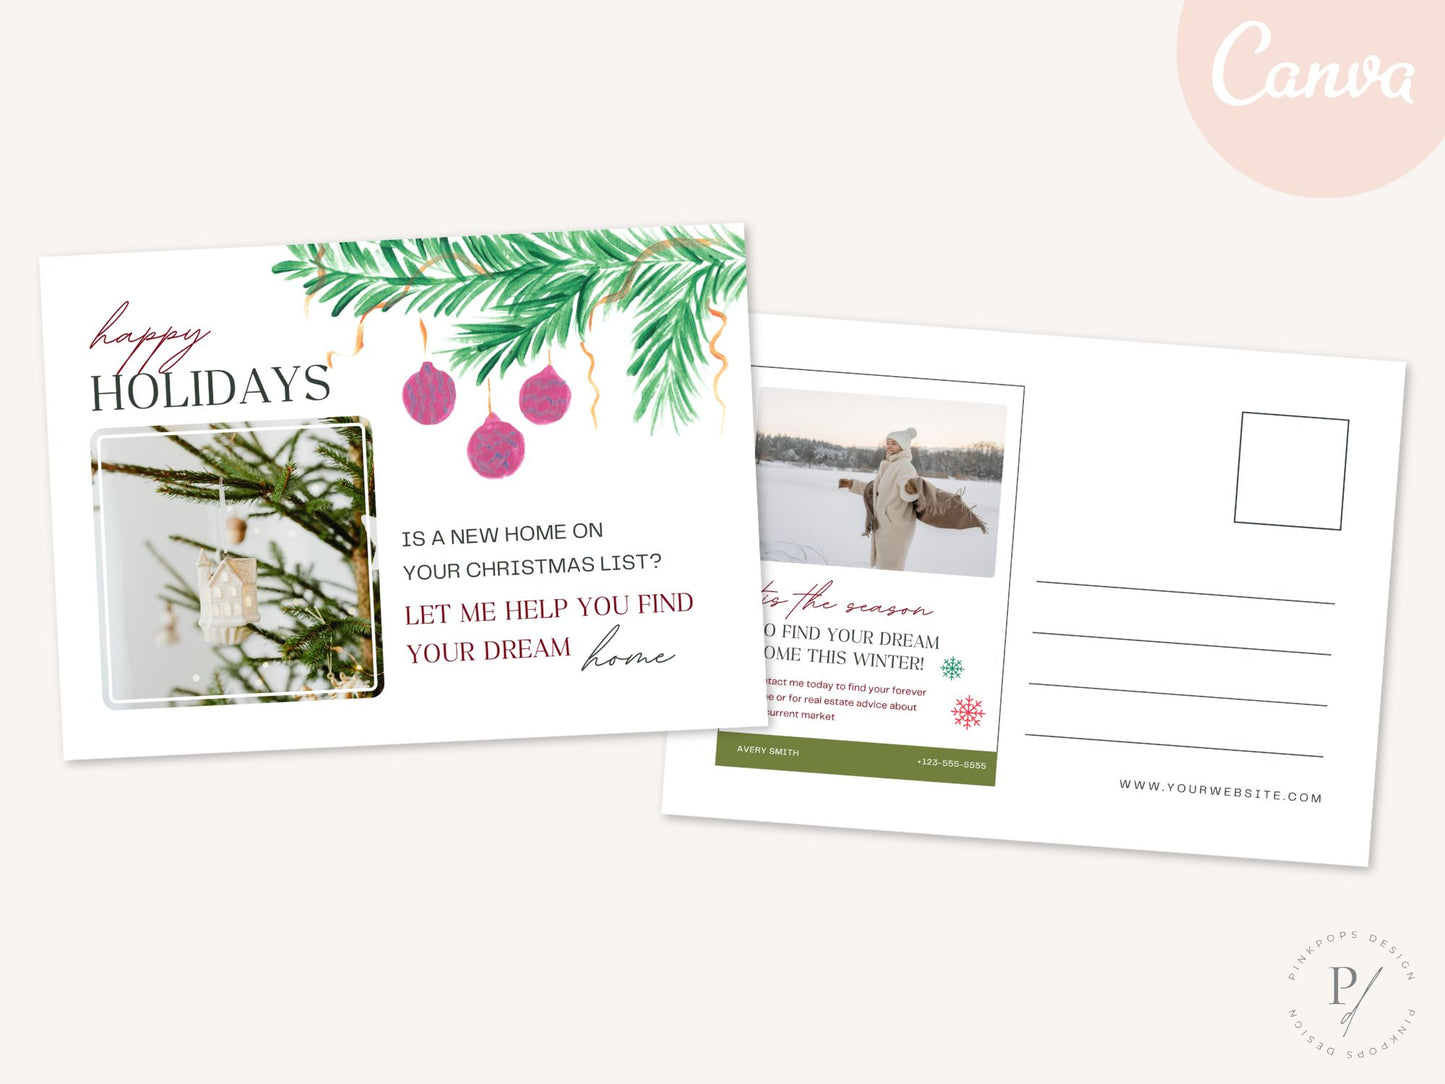 Real Estate Happy Holidays Christmas Postcard - Conveying Warm Holiday Wishes for Clients